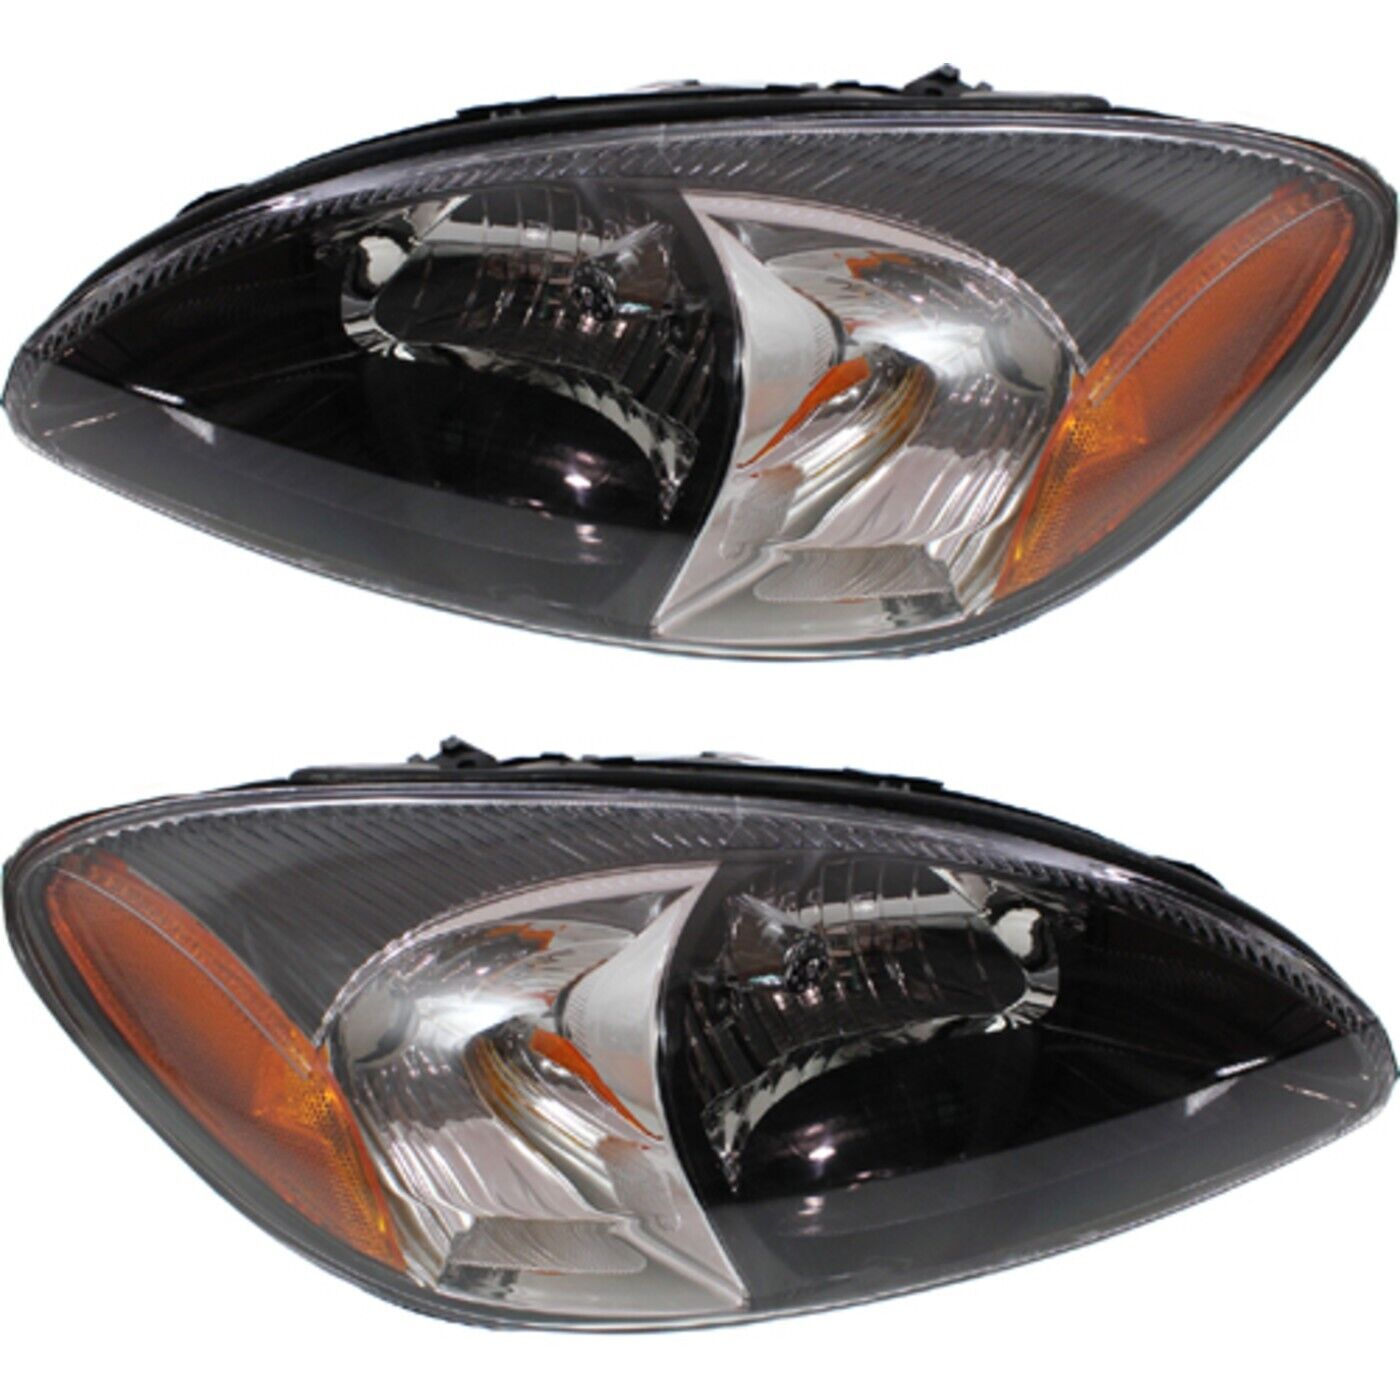 Headlight Set For 2000-2007 Ford Taurus Left and Right Black Housing 2Pc